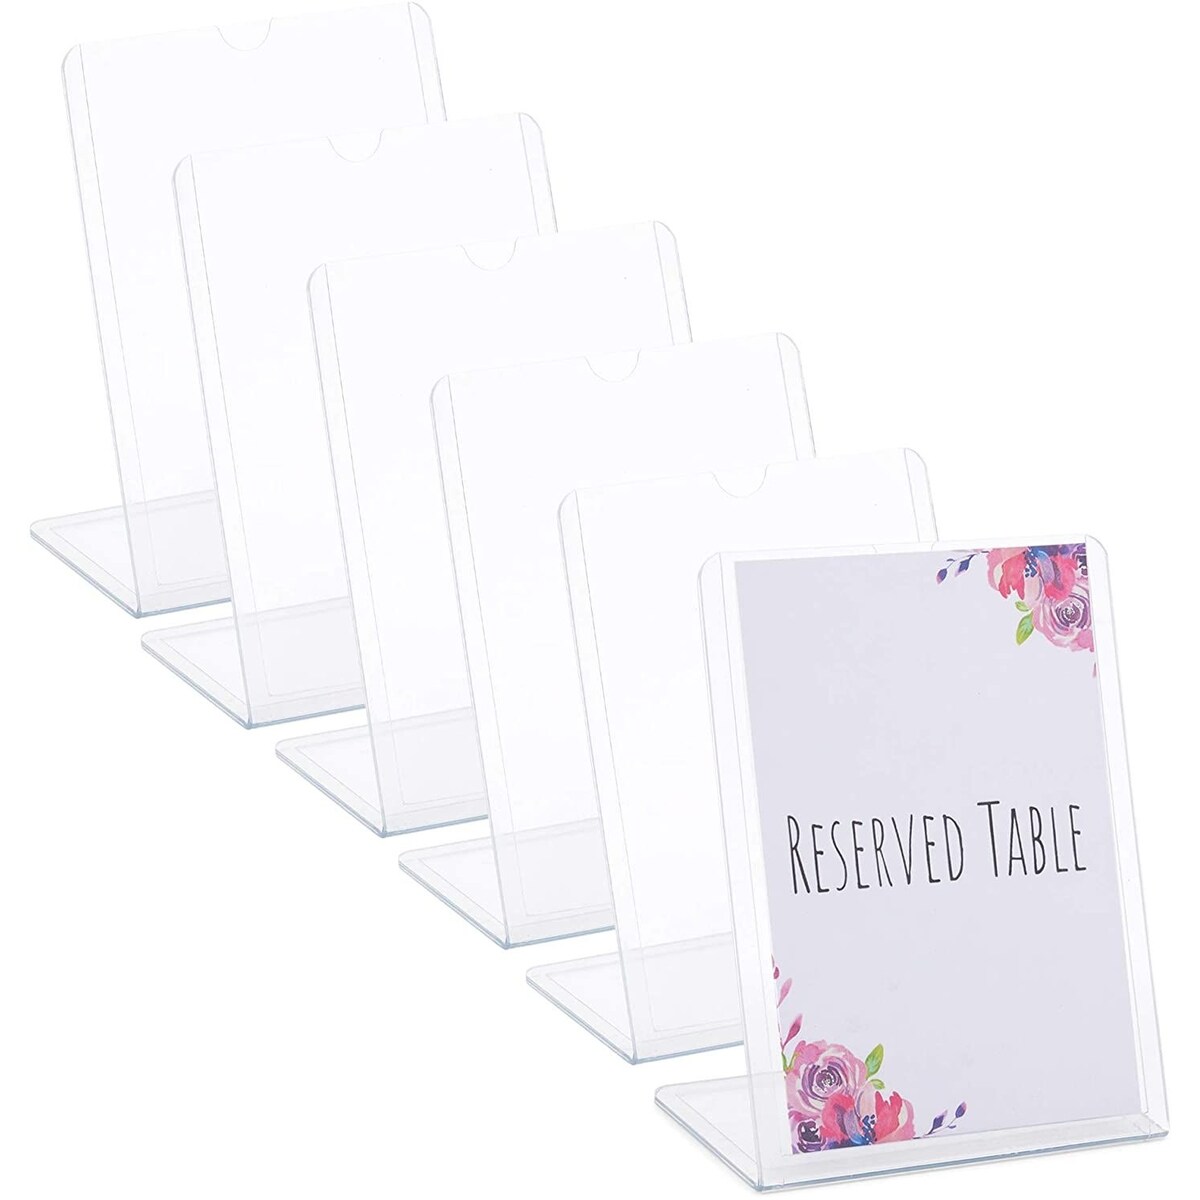 Clear Slant Back Plastic Sign Holder, Vertical Display Stand (5 x 7 in, 6 Pack)